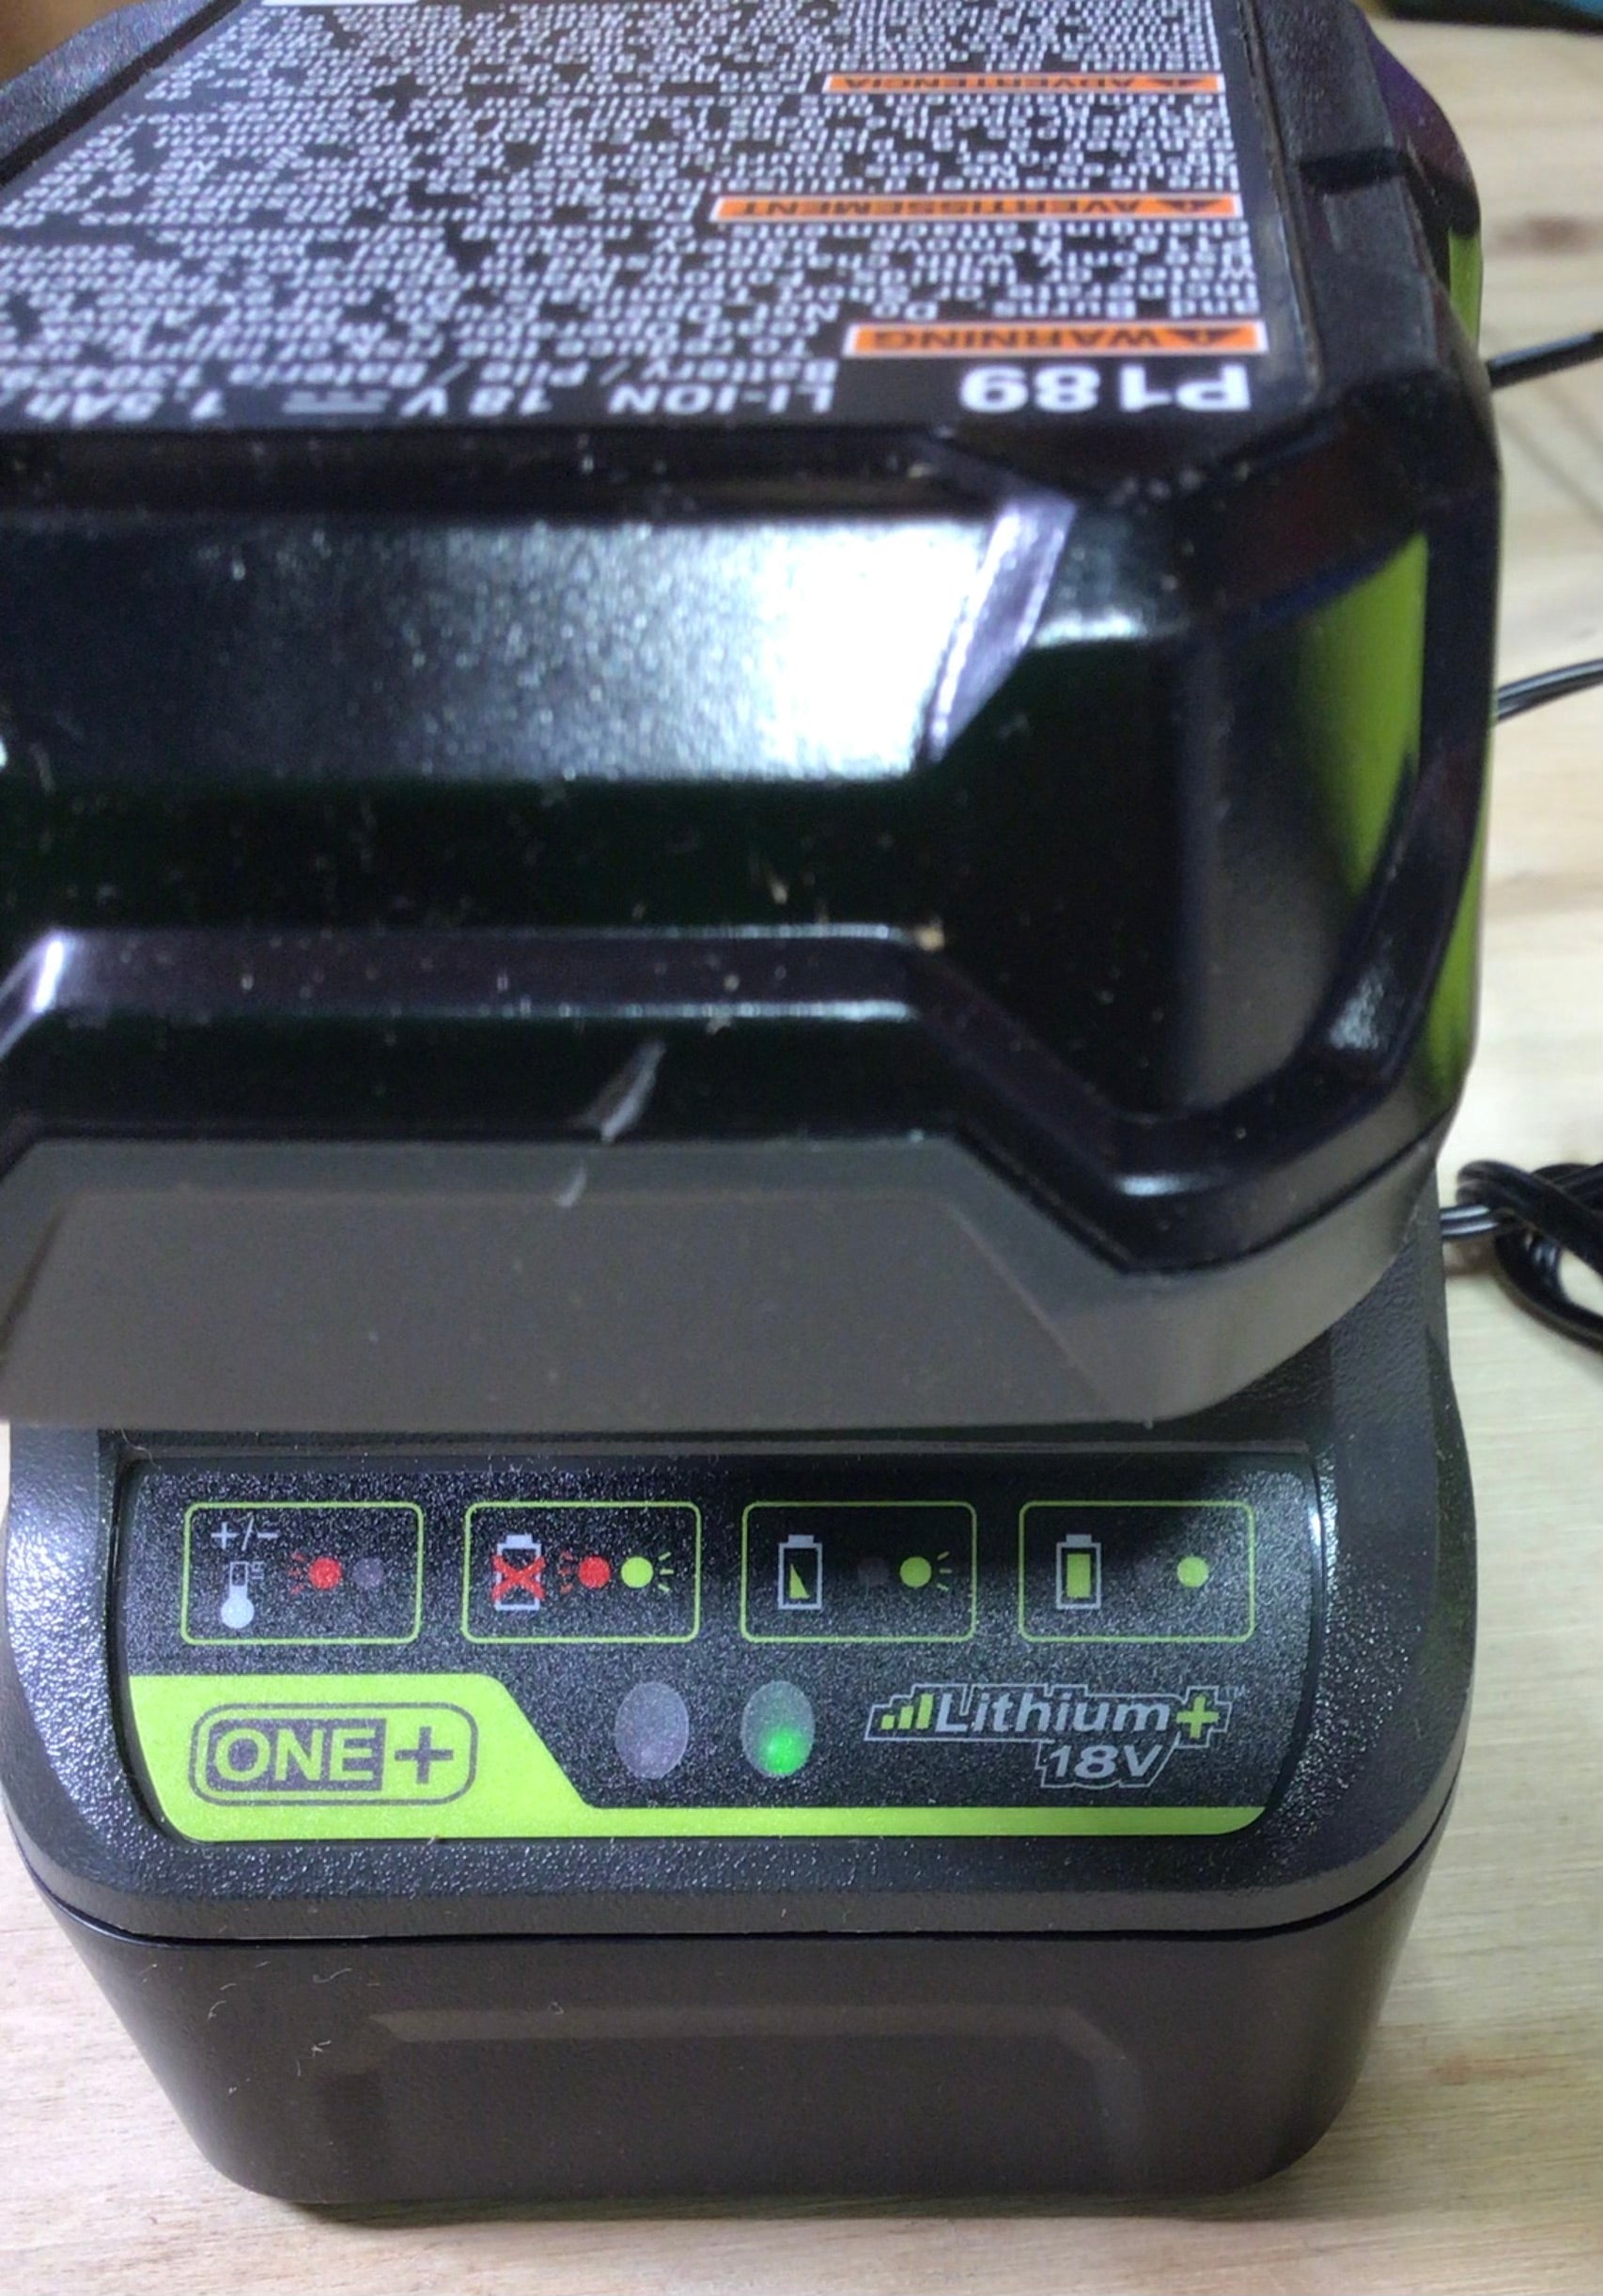 Ryobi 18-Volt ONE+ 1.5Ah Compact Lithium-Ion Battery**Used/Tested/working** (7777708310766)